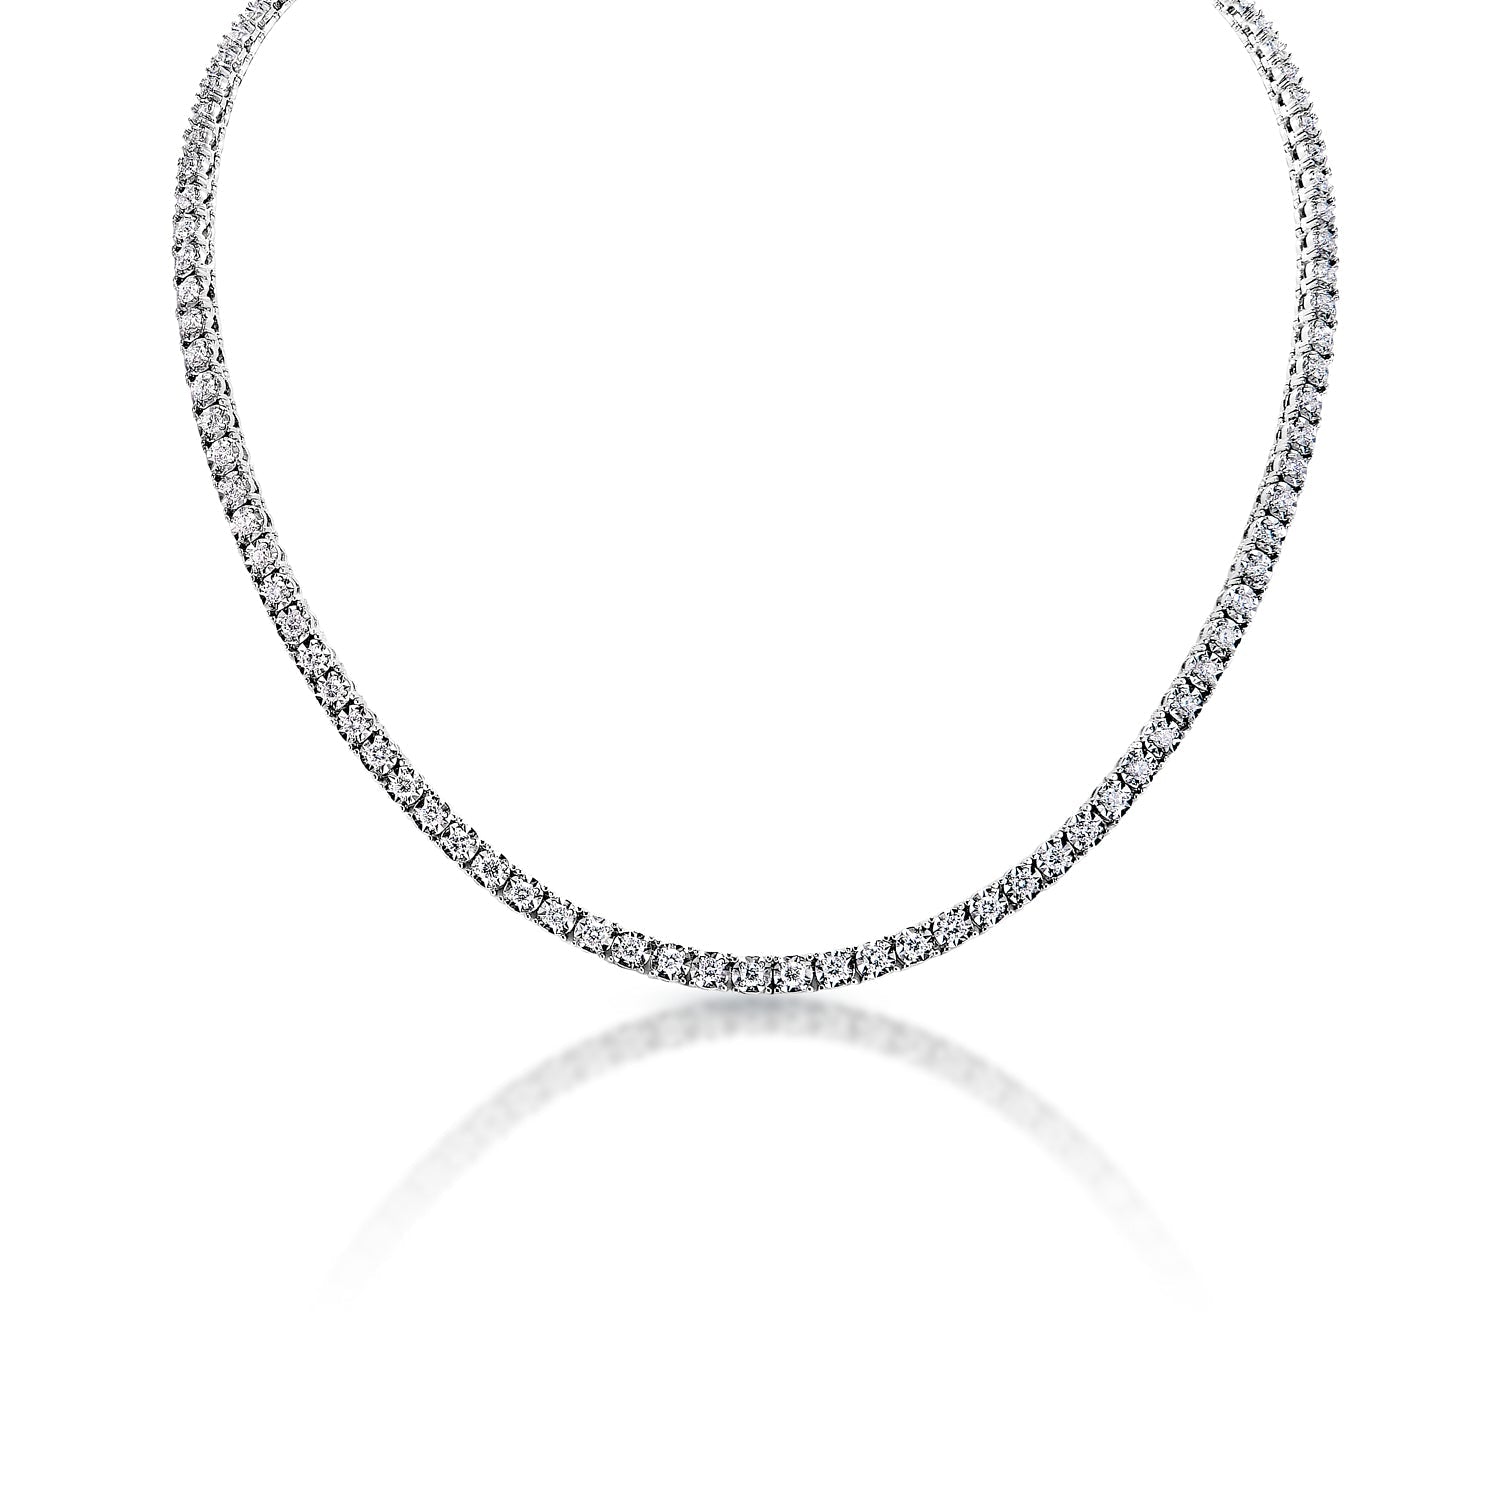 Natural Round Diamond Tennis Necklace 15 Ct D/SI In 18k White Gold